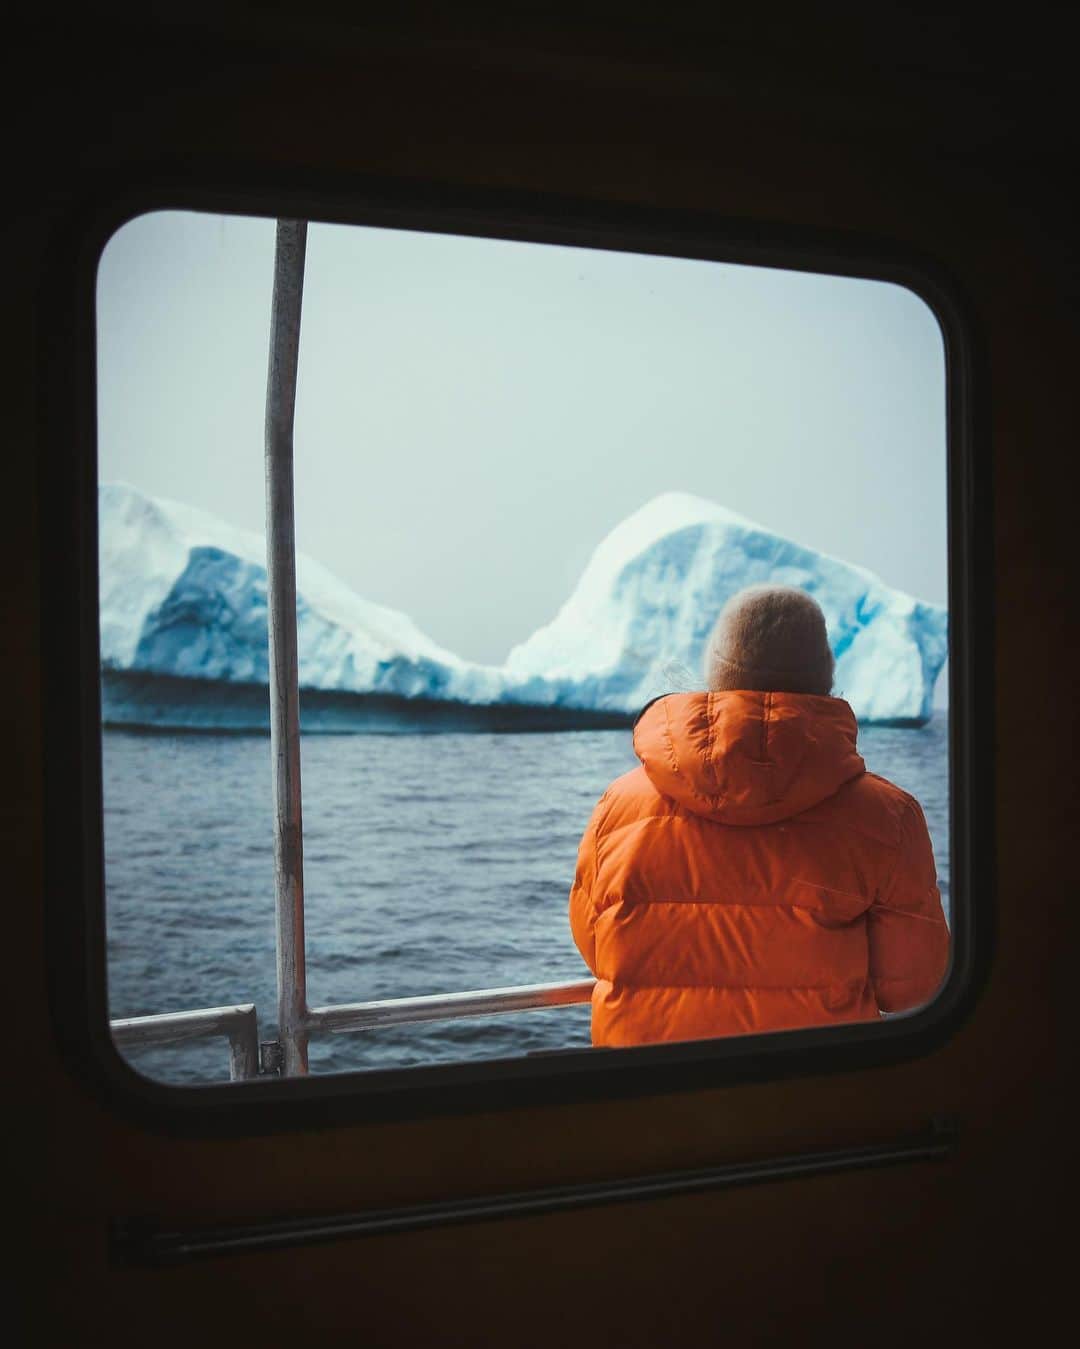 Explore Canadaさんのインスタグラム写真 - (Explore CanadaInstagram)「Hey everyone! I’m Kara O‘Keefe (@karaokeefe), a pharmacist and freelance photographer from Canada’s most easterly province - Newfoundland and Labrador.⁠⠀ ⁠⠀ Growing up in a province isolated from the rest of Canada leant itself to the development of my desire to travel. I have been so privileged to experience countless impressive, breathtaking places in my travels. Seeing the world and its wonders allowed me to appreciate our own wonders here at home. The lightning crack of an iceberg calving, humpback whales feeding metres from the shore, brilliant sunsets over rocky cliffs, the smell of the ocean on a foggy day, the tones of our barren bogs, our colourful homes, a bucket of cod just caught in the bay. And the people! The quick wit, the charming accents, the hospitality, the beauty in chit chat with a stranger. Each nook and cranny of our province, which I’m privileged to photograph, grounds me closer and closer to my home. This year has demonstrated, more than ever, the importance of exploring, supporting, and contributing to the places we call home.⁠⠀ ⁠⠀ Newfoundland and Labrador is raw. It is honest in its culture and spirit. Our landscape, rural makeup, and heritage are striking to all who visit. We share a deep pride for our province, its beauty, and our ability to make this rock our home. This is apparent from the row houses of St. John’s, to the rural communities dotting our shores, to the northern tip of Labrador. You’ll be tickled to hear it in a variety of dialects if you simply take the time to listen. I am a proud Canadian and a proud Newfoundlander - both of which I carry with me throughout my travels. This pride for my heritage and love for my home shines brightest when I hold my camera. It serves as an extension of myself, which I use to present my province.⁠⠀ My only advice is to get out there and seek the beauty in your own home and surroundings. When you’ve discovered this beauty, I hope that you’ll come explore ours right here in Newfoundland and Labrador.⁠⠀ ⁠⠀ You won’t regret it.⁠⠀ ⁠⠀ 📷: @karaokeefe⁠⠀ 📍: @newfoundlandlabrador⁠⠀ ⁠⠀ #ExploreNL #IcebergsNL」11月14日 1時49分 - explorecanada